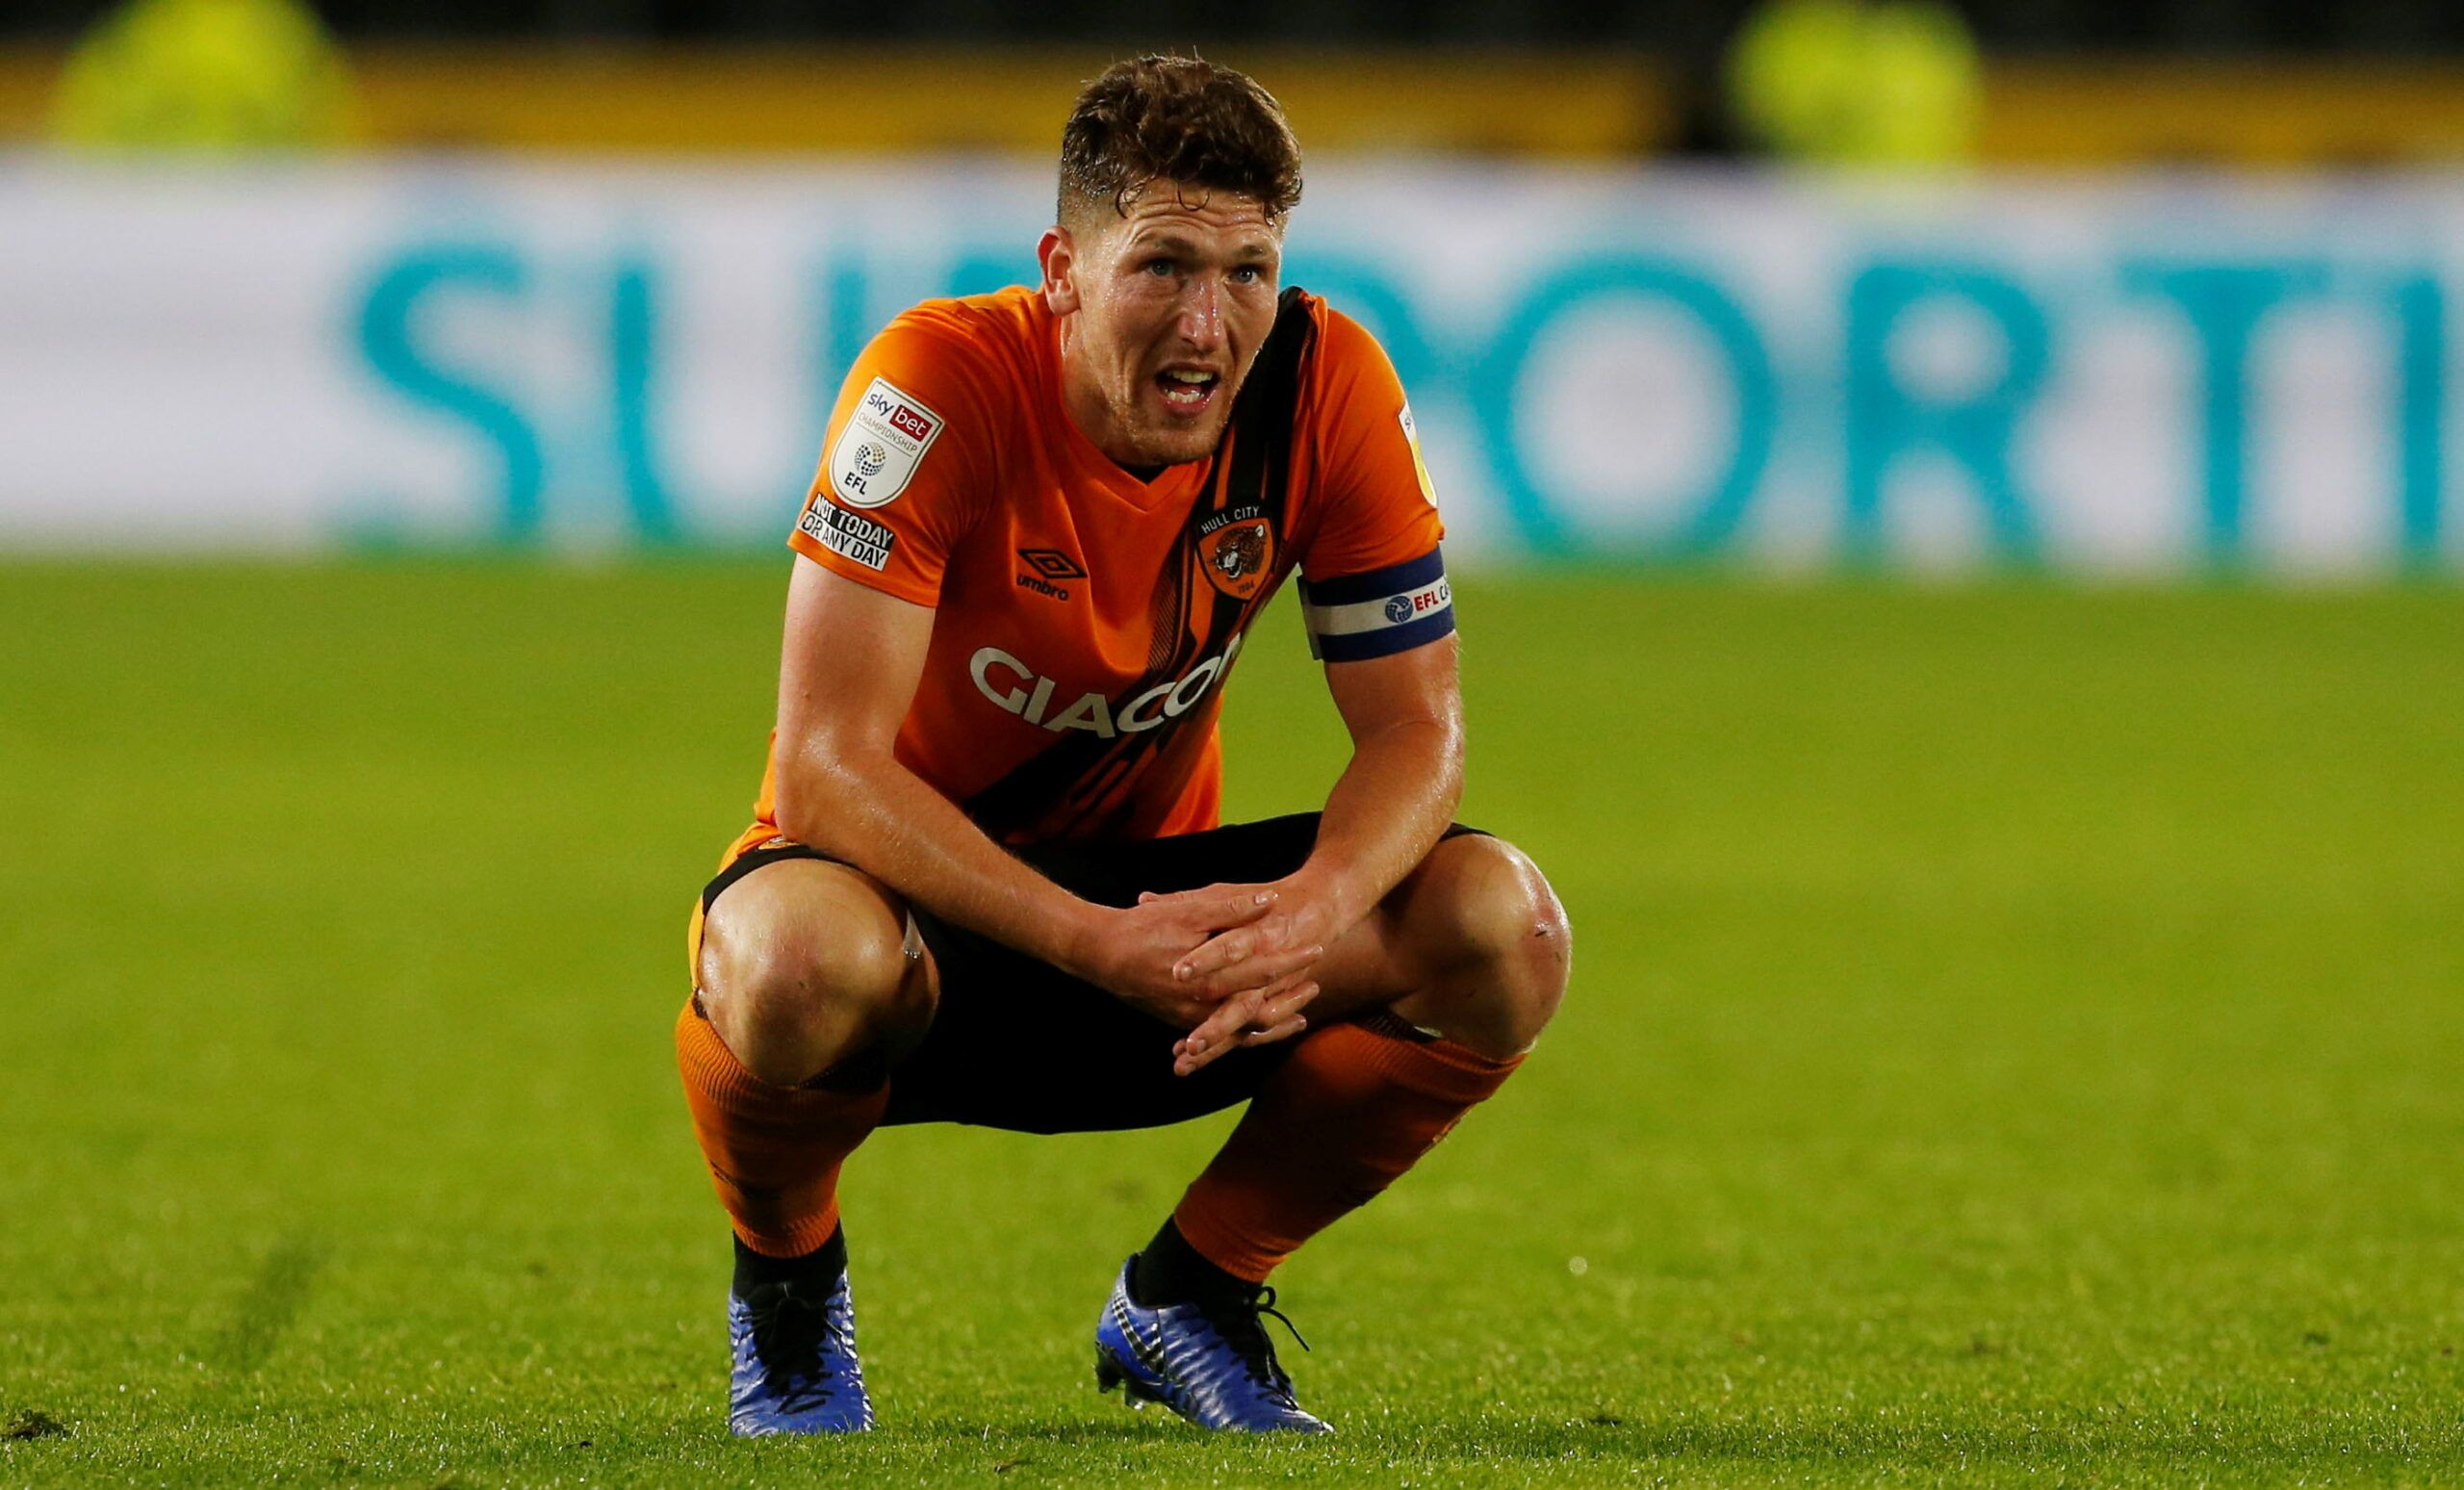 Soccer Football - Championship - Hull City v Peterborough United - KCOM Stadium, Hull, Britain - October 20, 2021  Hull City's Lewis Coyle looks dejected   Action Images/Craig Brough  EDITORIAL USE ONLY. No use with unauthorized audio, video, data, fixture lists, club/league logos or 